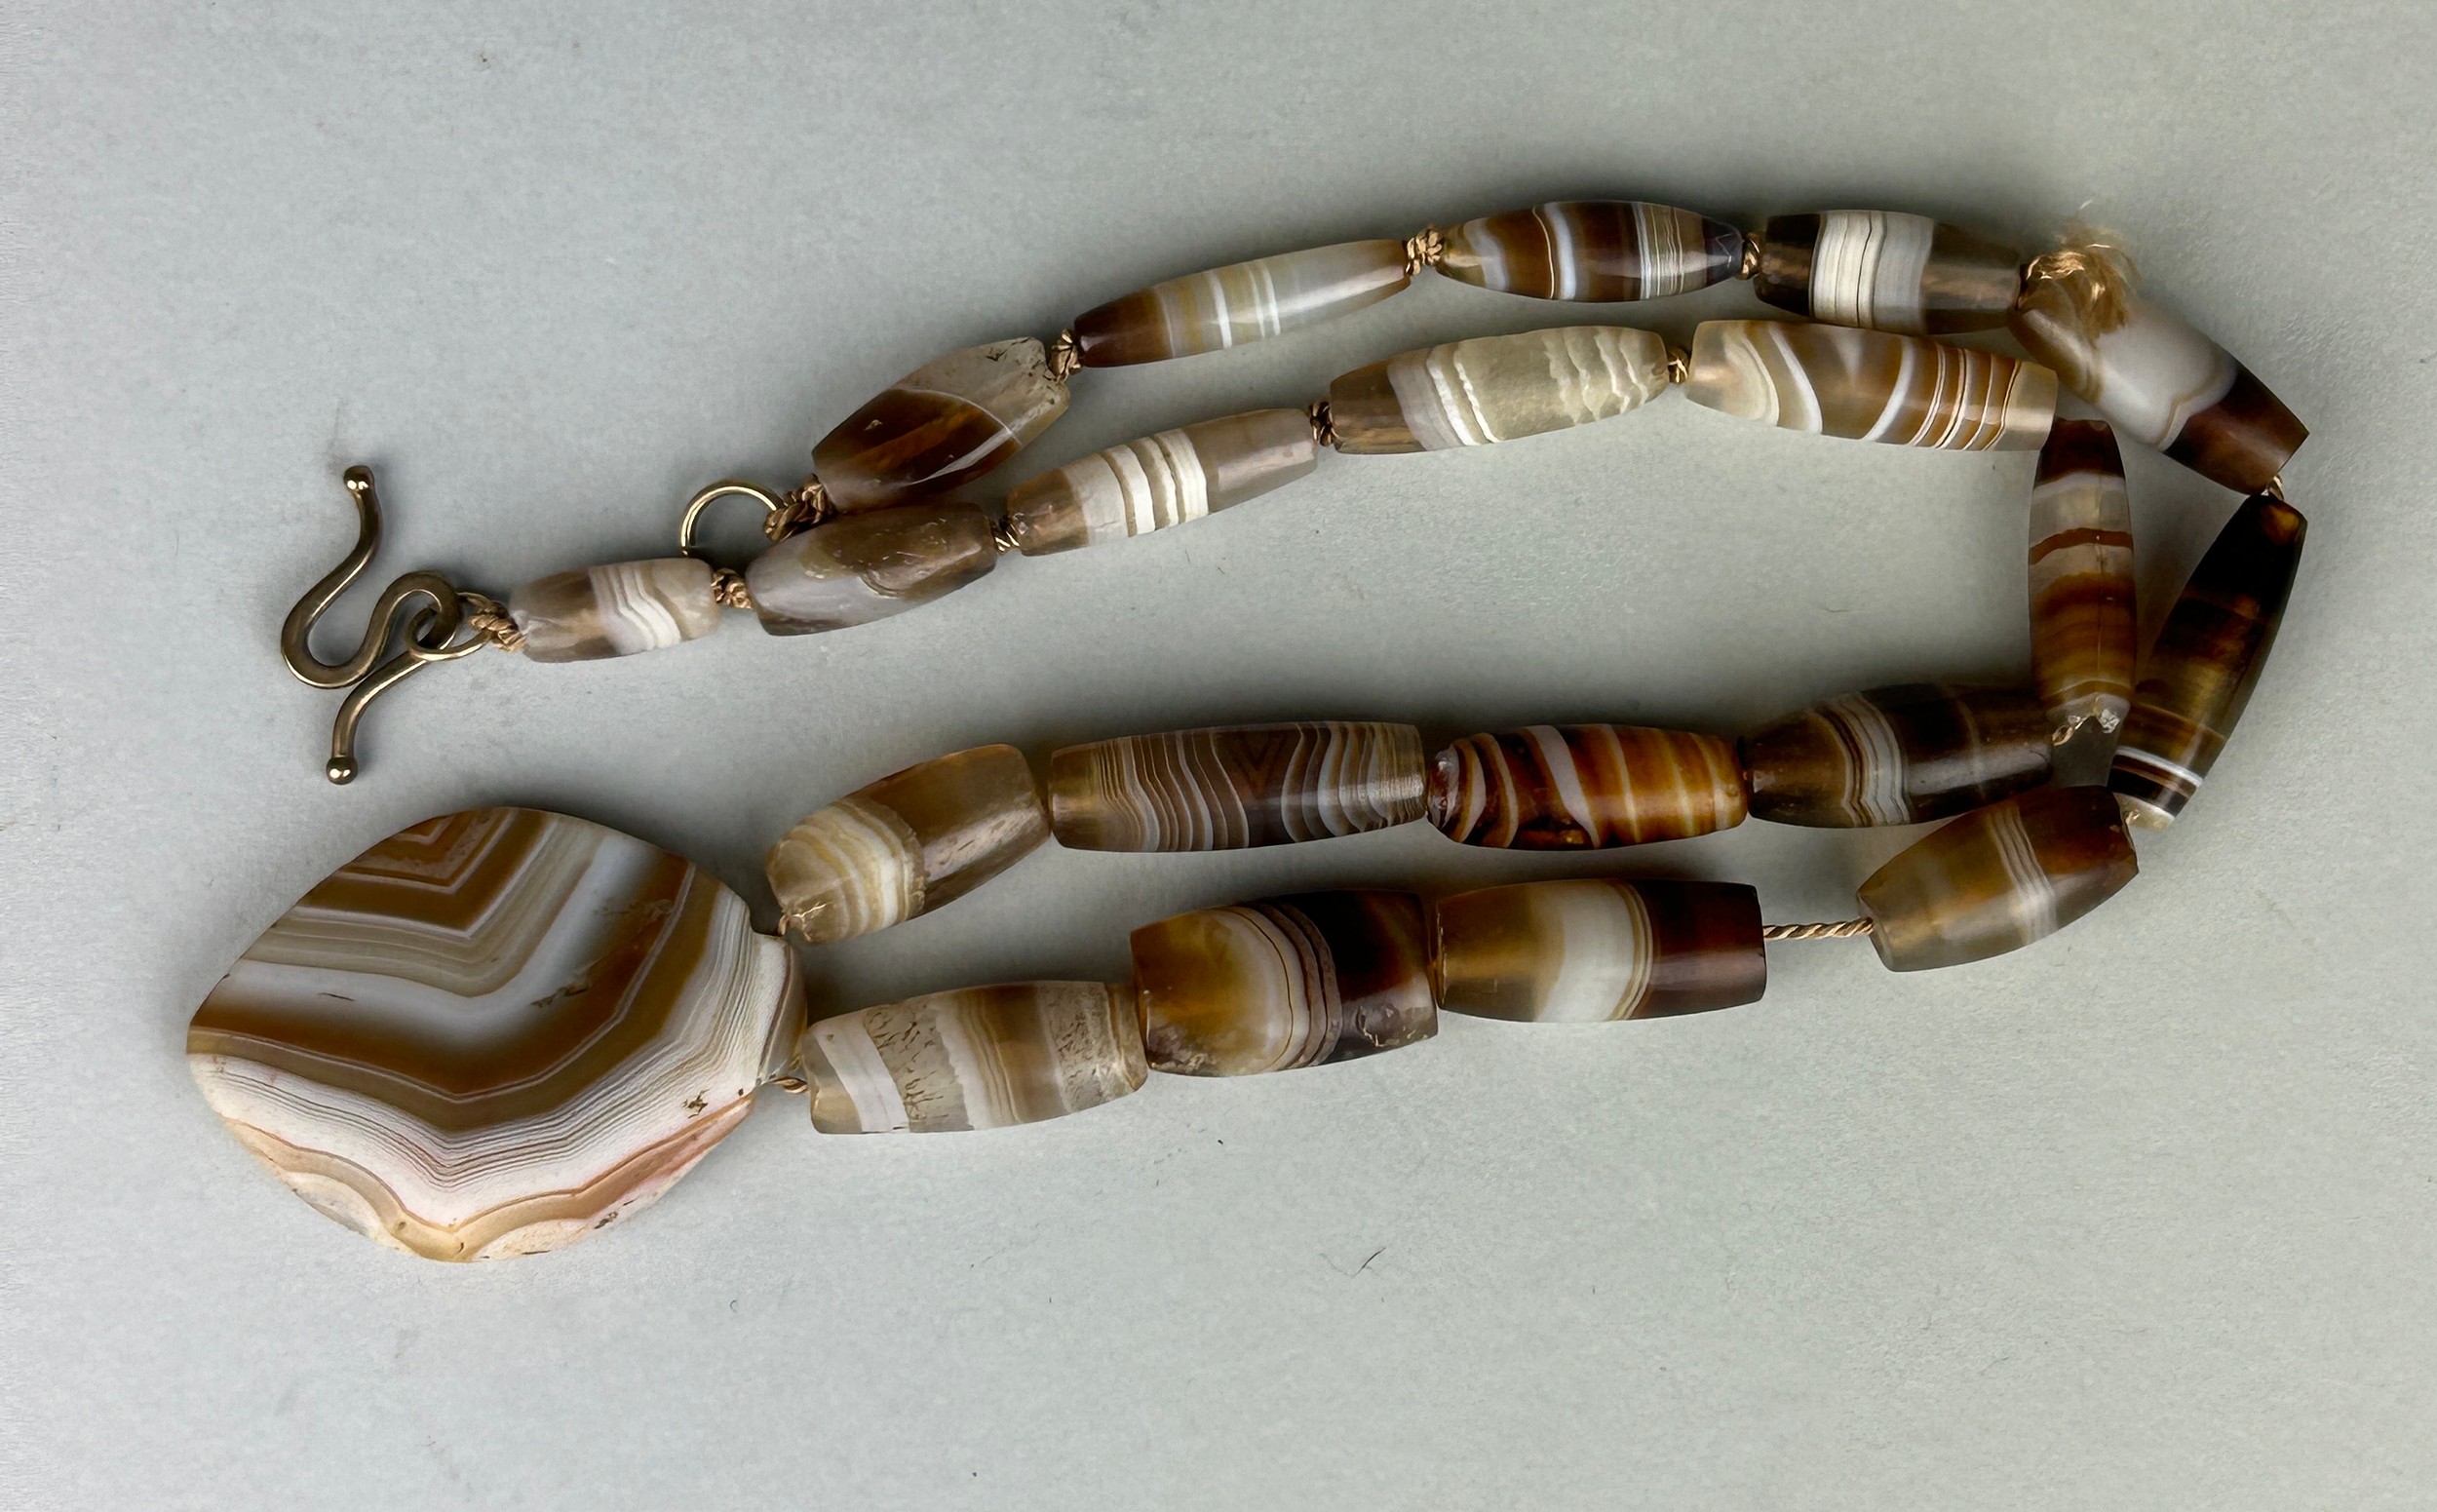 A WESTERN ASIATIC BANDED AGATE BEAD NECKLACE CIRCA 3RD MILLENIUM B.C. / 2ND CENTURY A.D. ALONG - Image 11 of 14